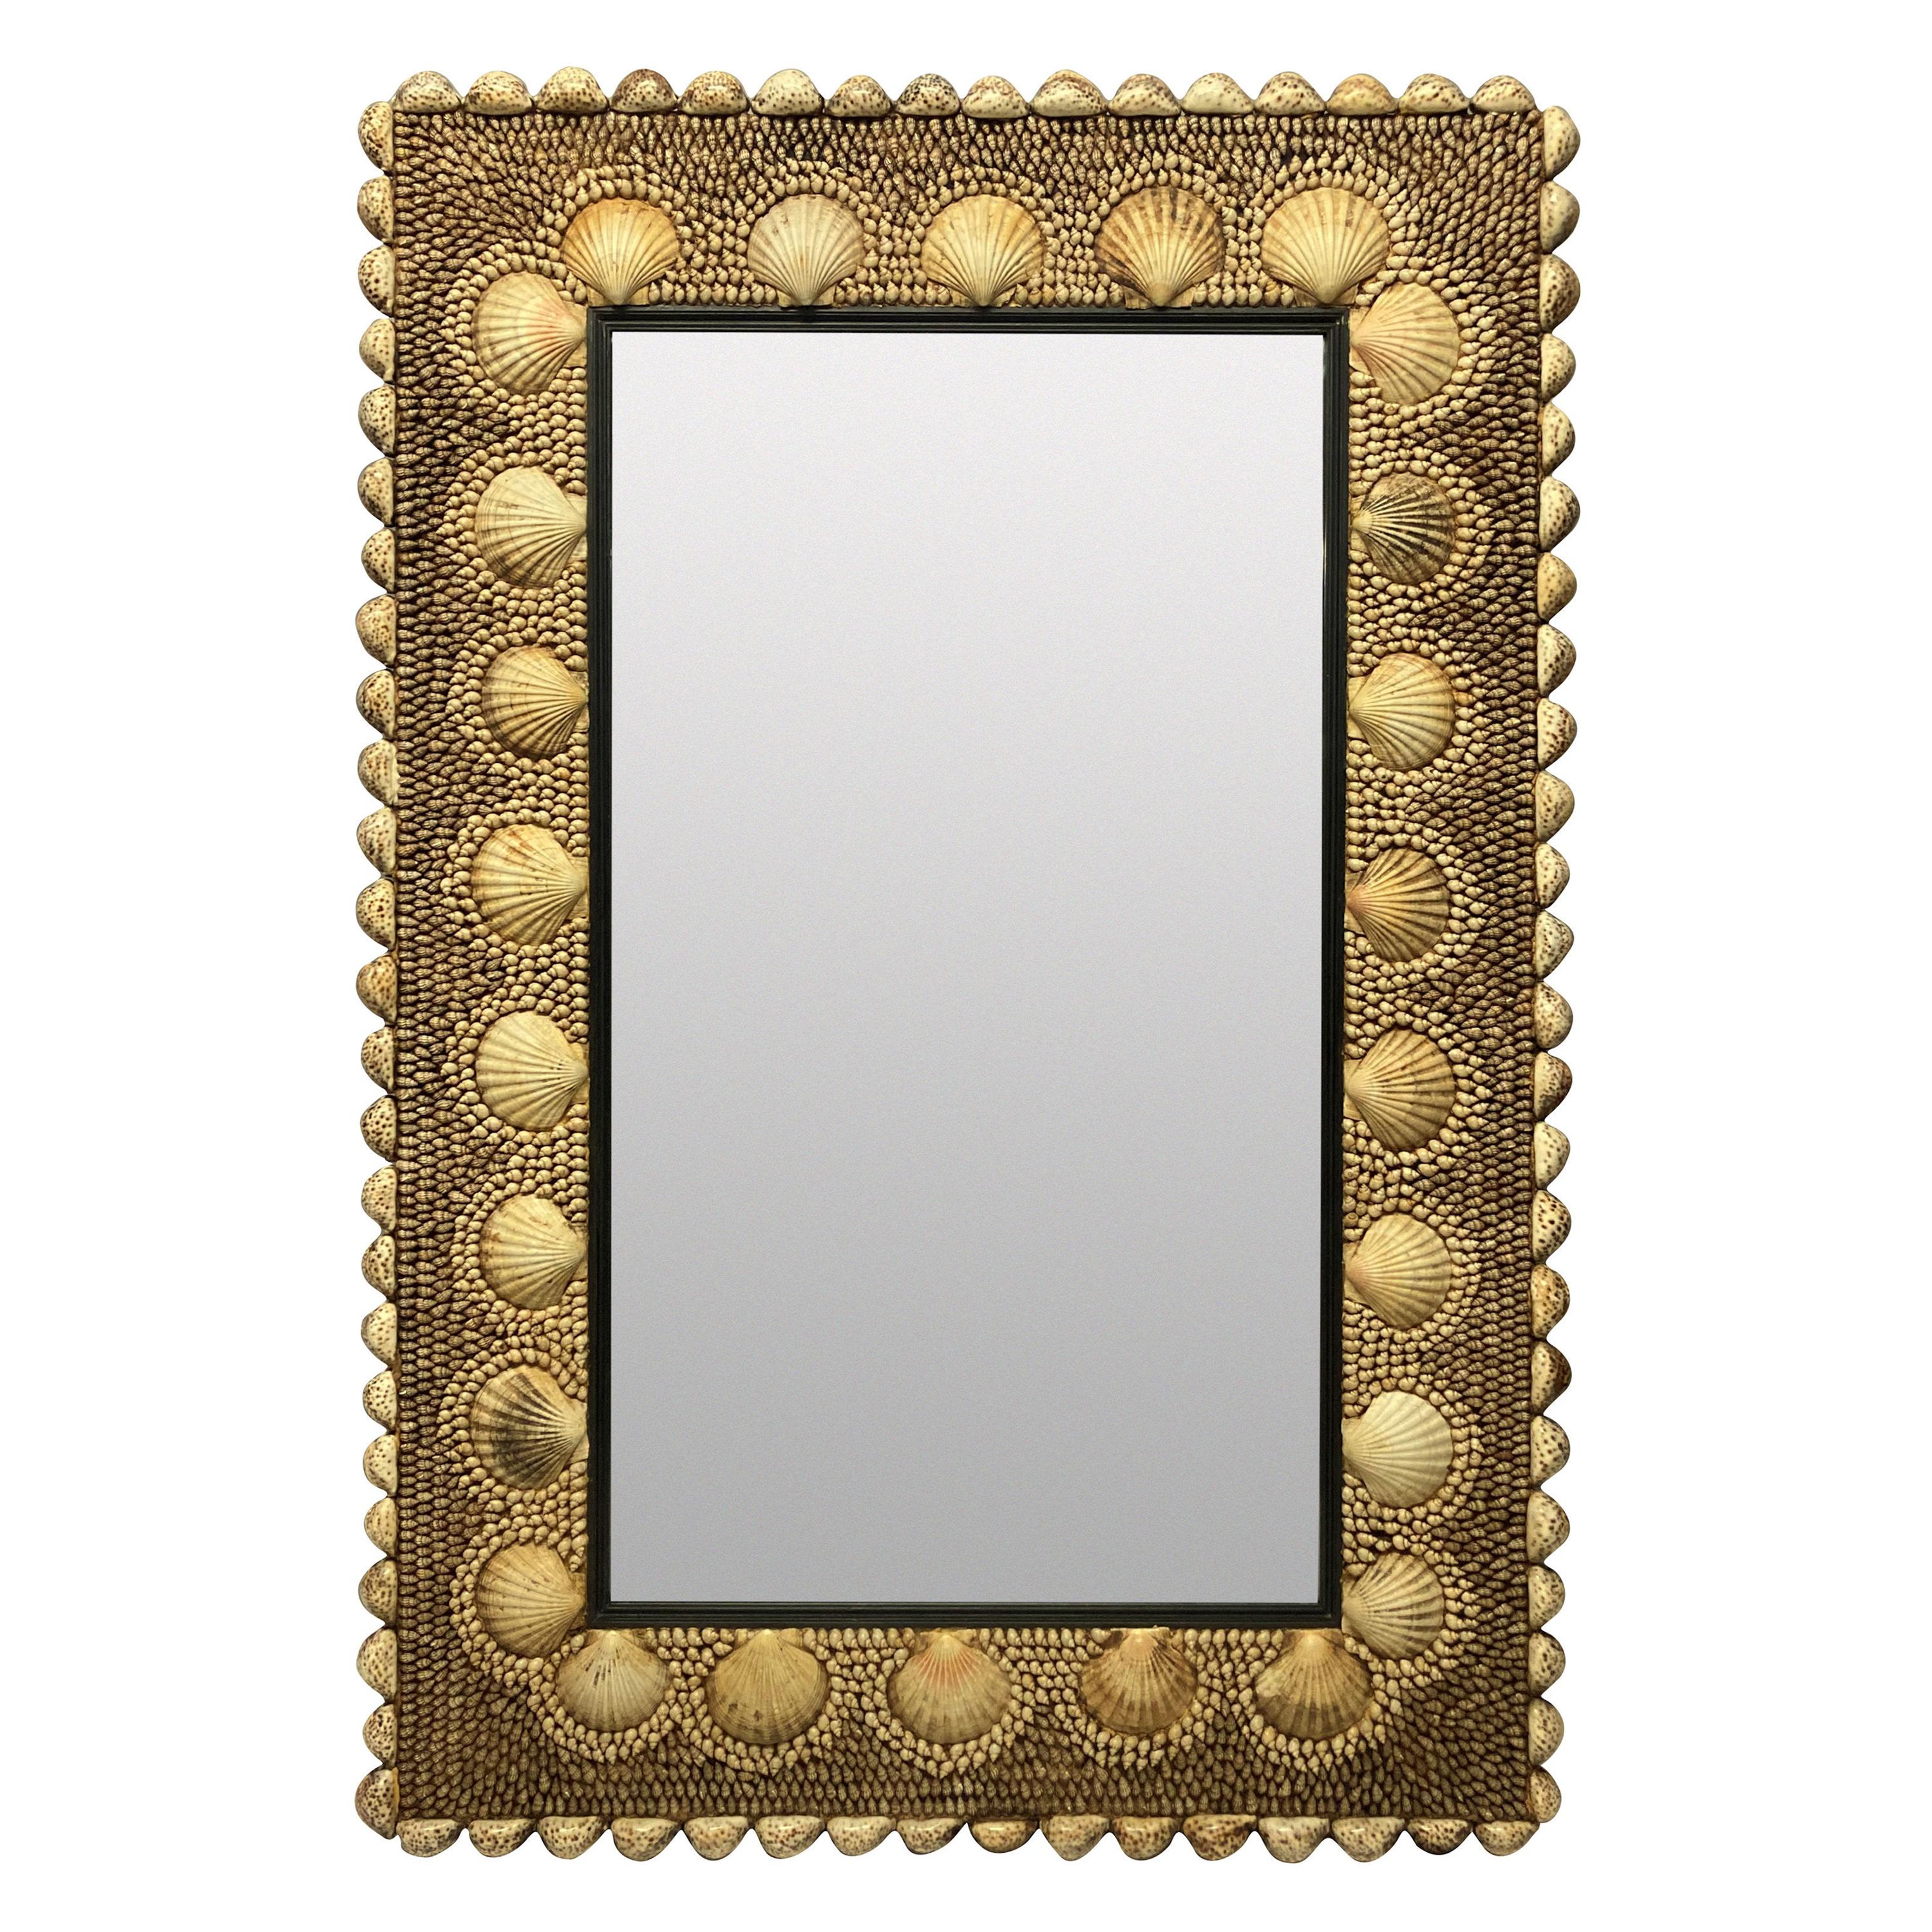 Large Shell Encrusted Mirror by Redmile